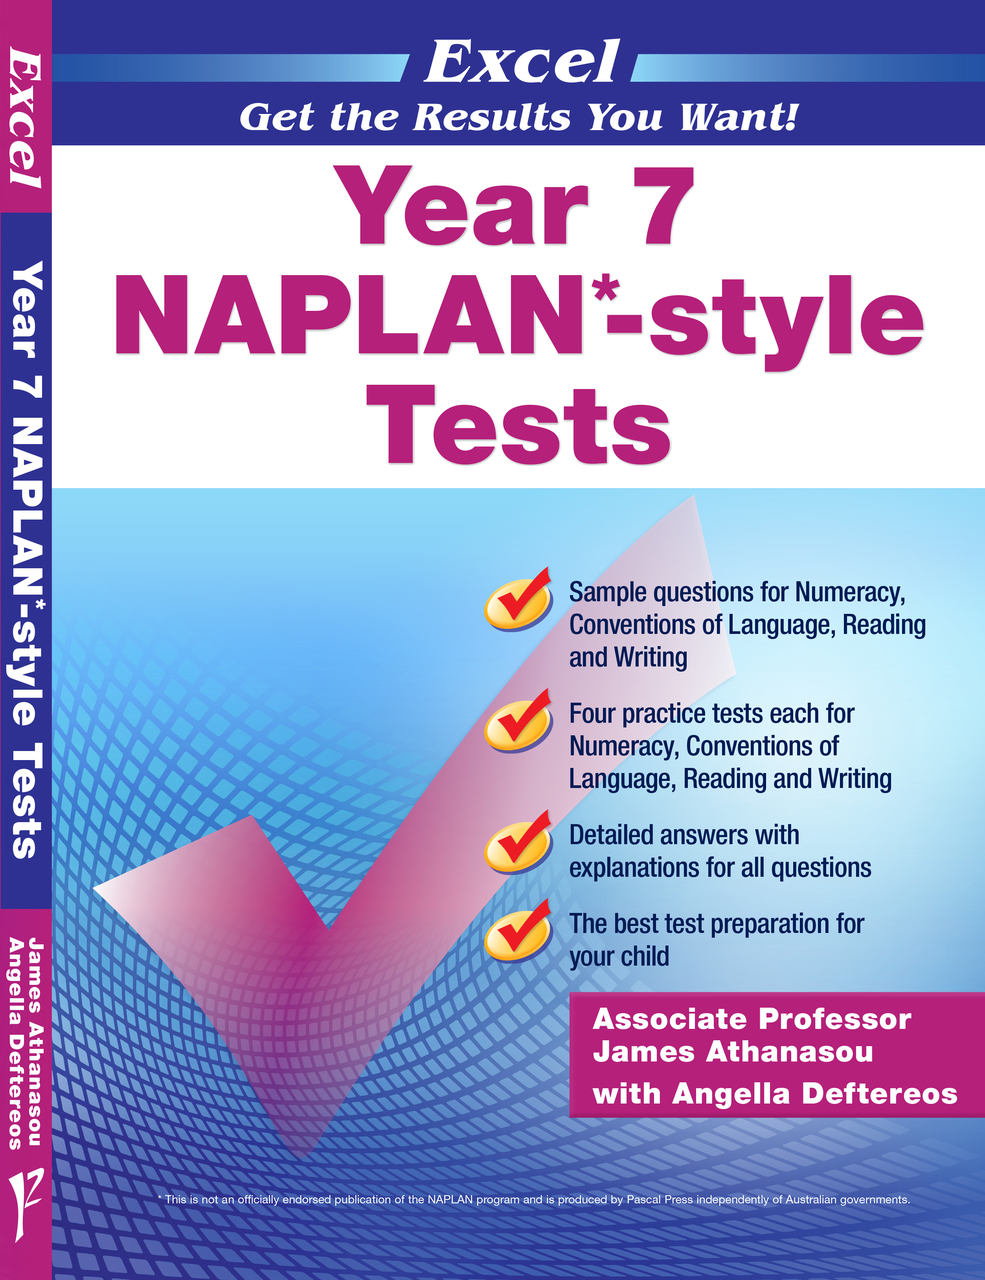 EXCEL - YEAR 7 NAPLAN*-STYLE TESTS